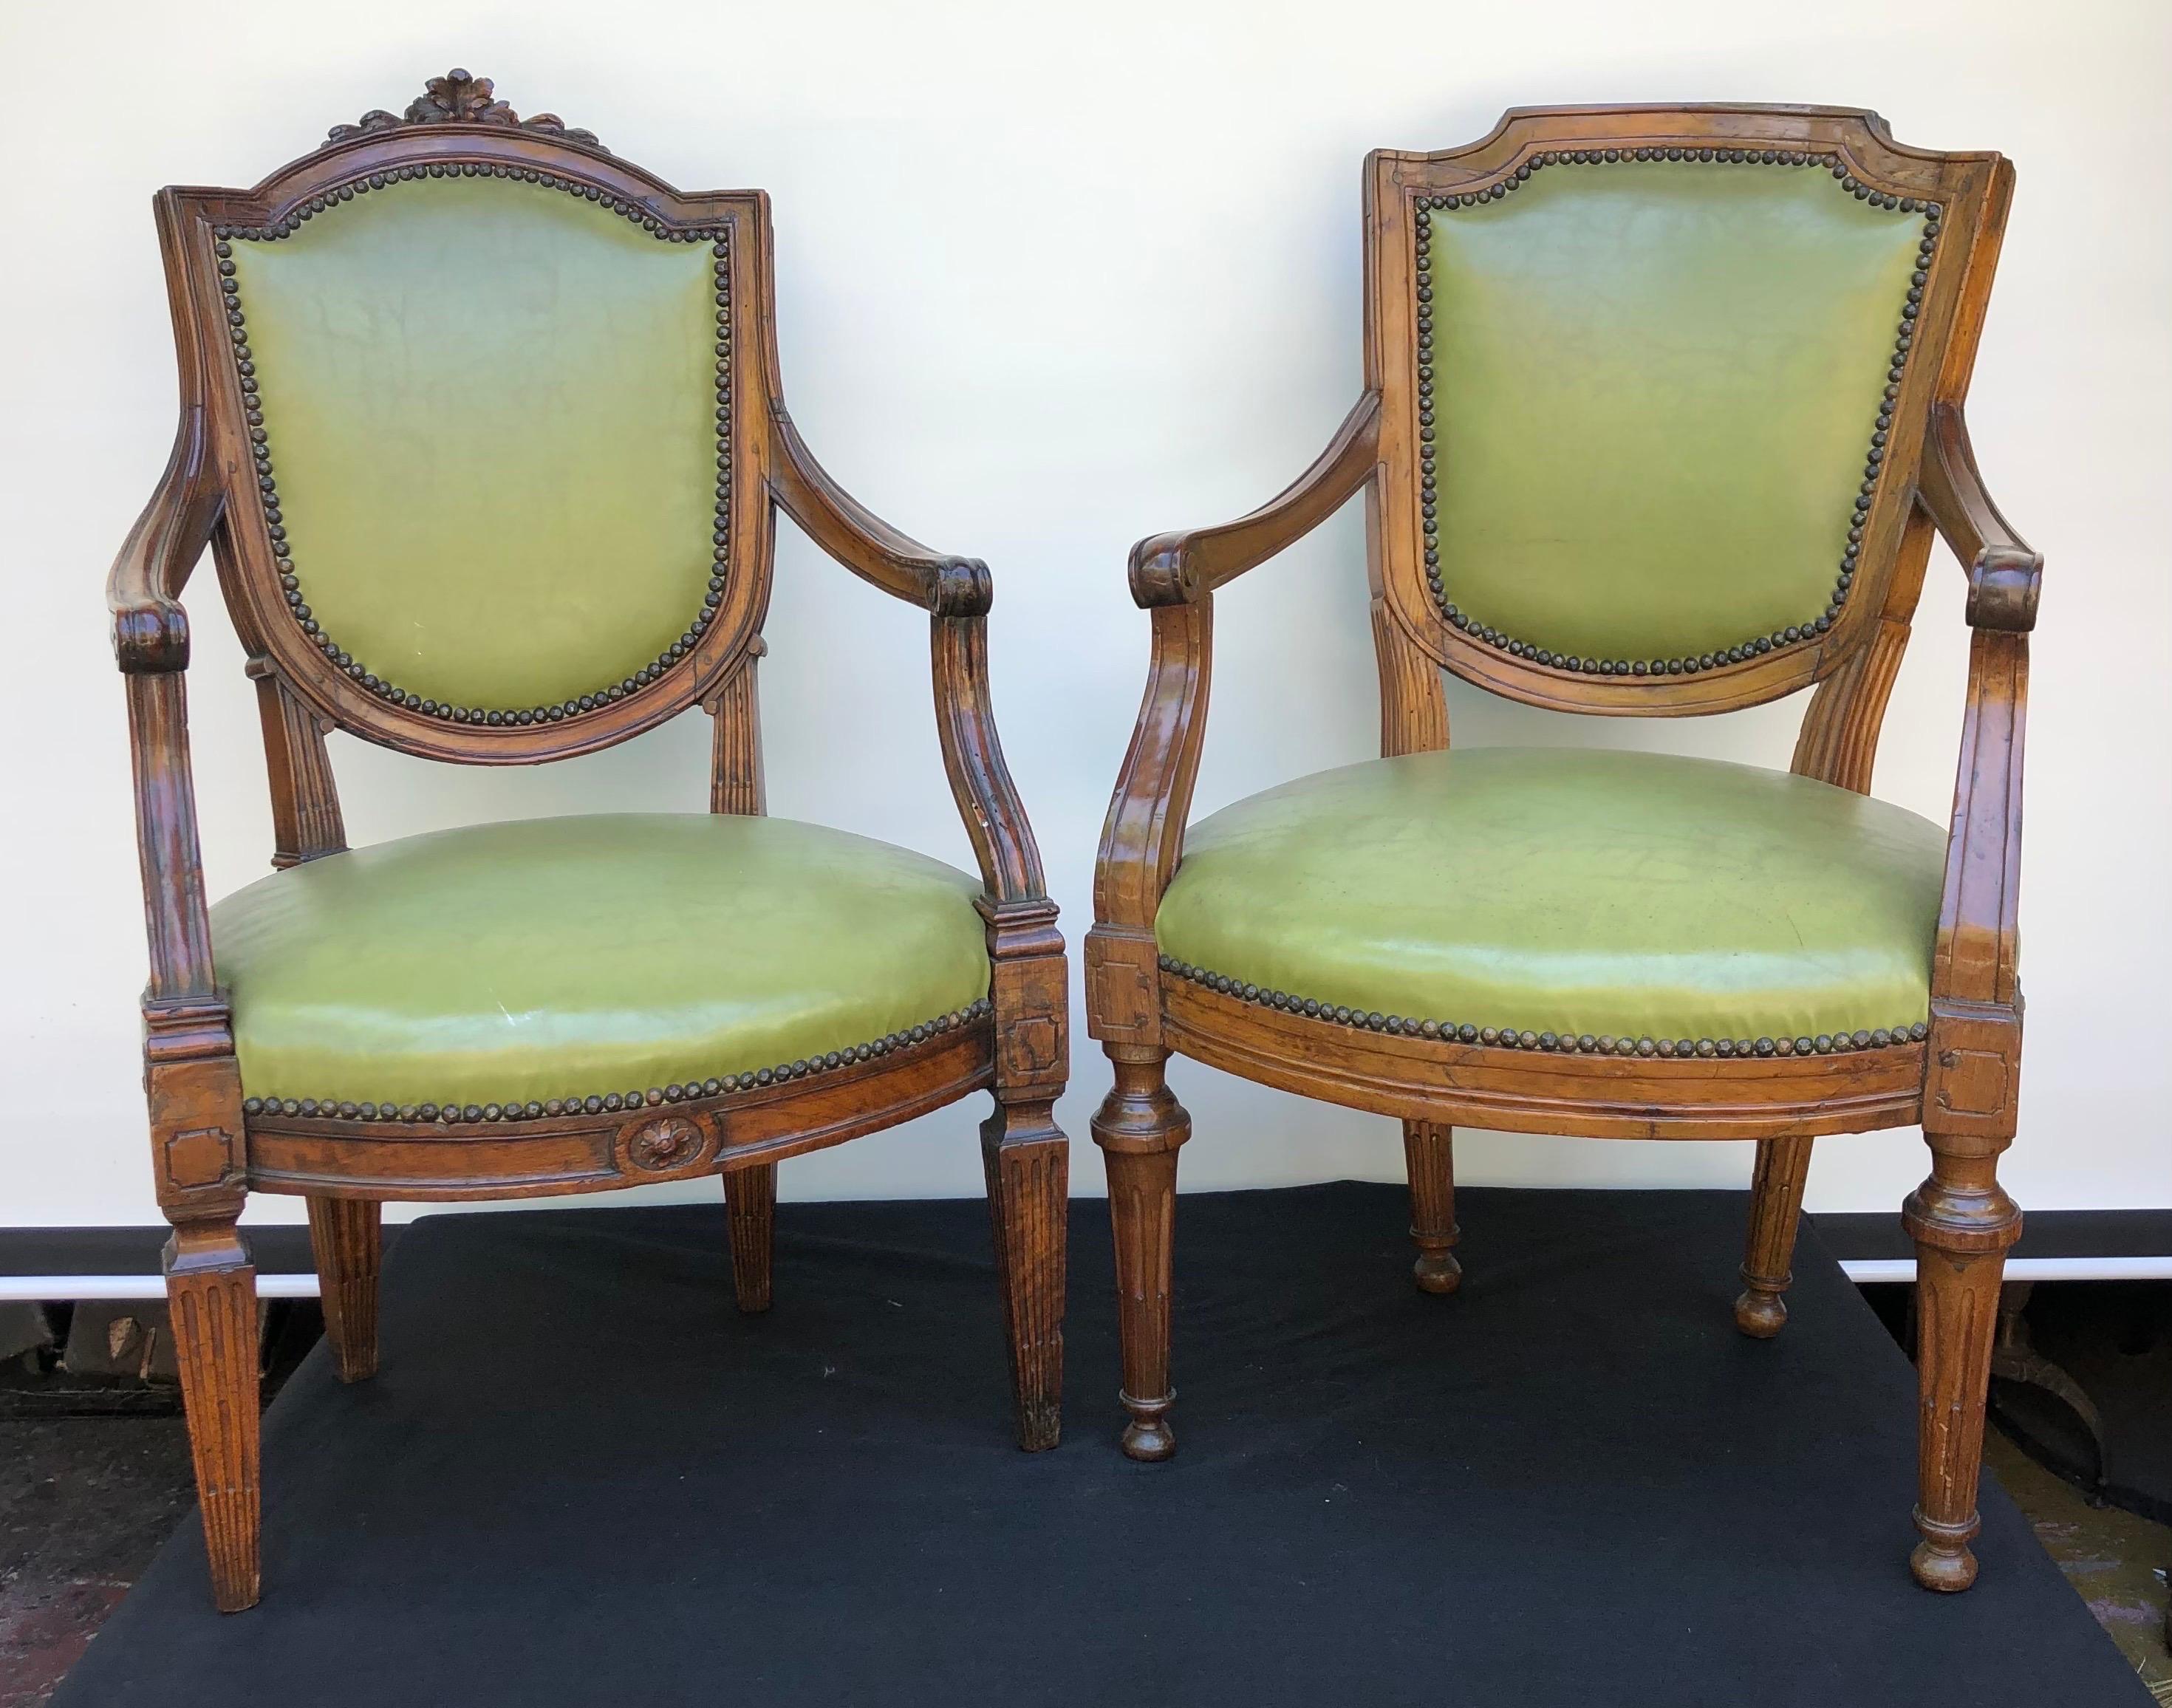 Two 18th Century complementary Italian Walnut Neoclassical Arm Chairs with magnificent green leather upholstery. The two Walnut Arm Chairs are mortise and tenon through with pegs. These Italian Chairs would work well in an Office, Library, or Bar.